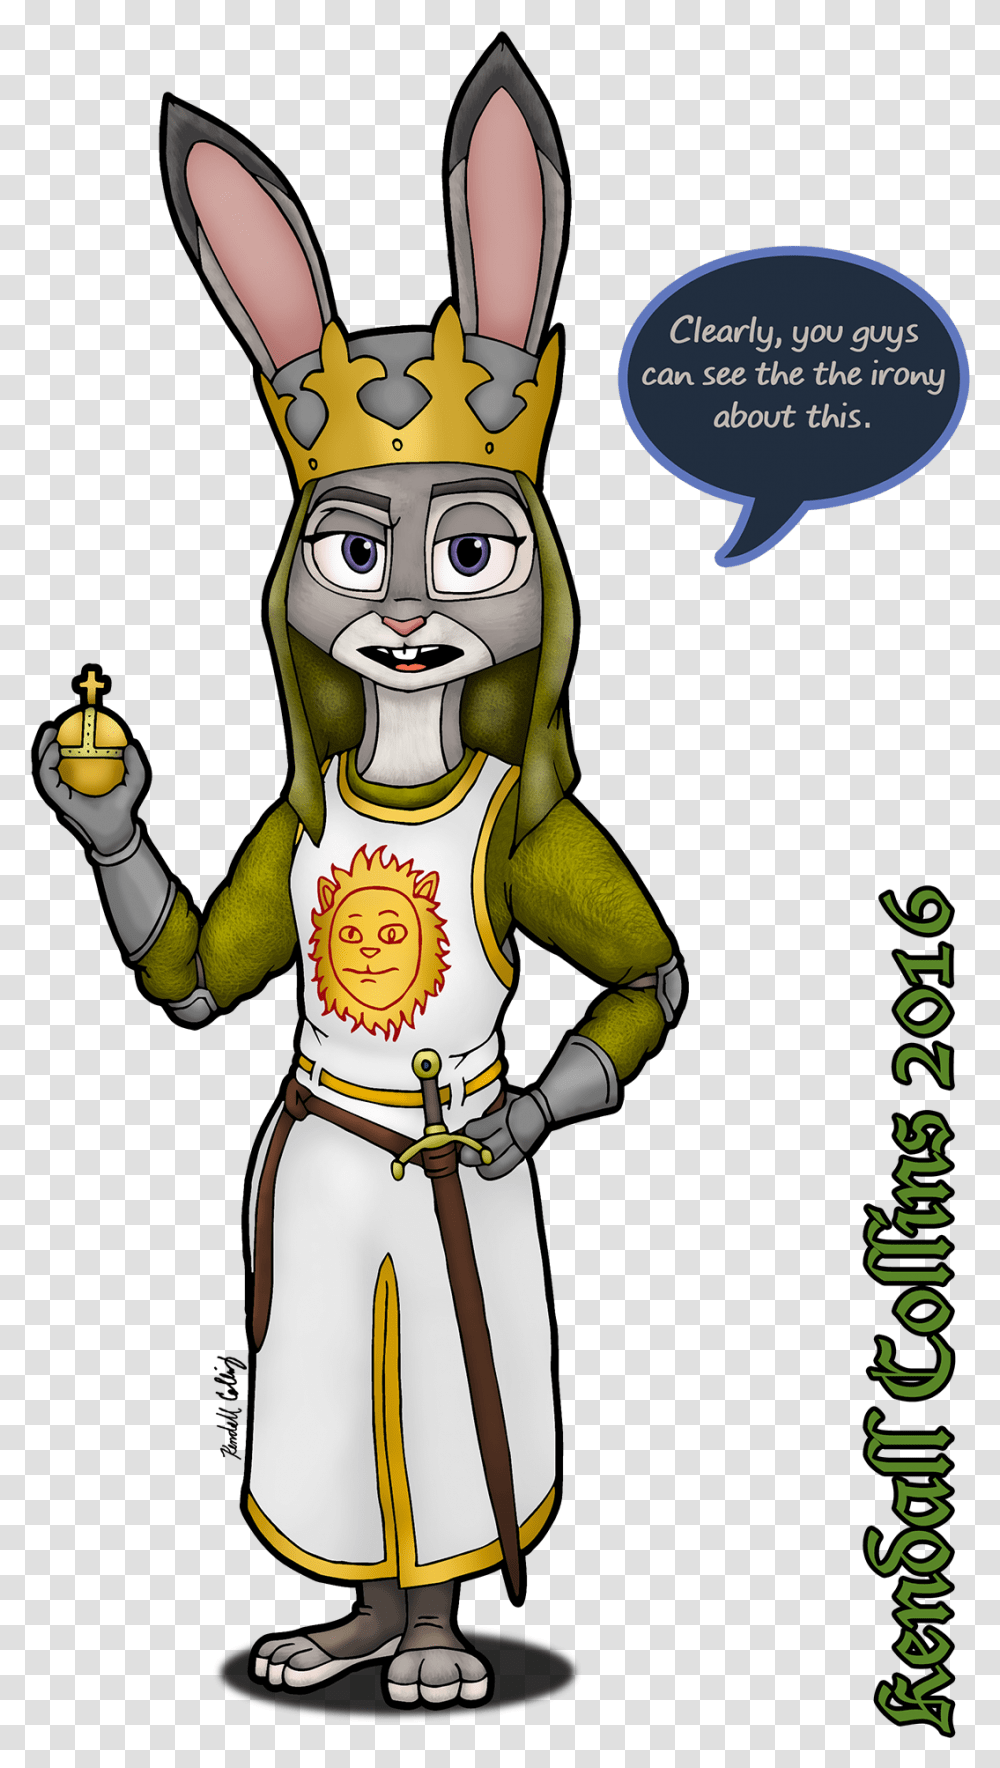 Judy Hopps And The Holy Hand Grenade Holy Hand Grenade Real, Toy, Mascot, Advertisement, Poster Transparent Png